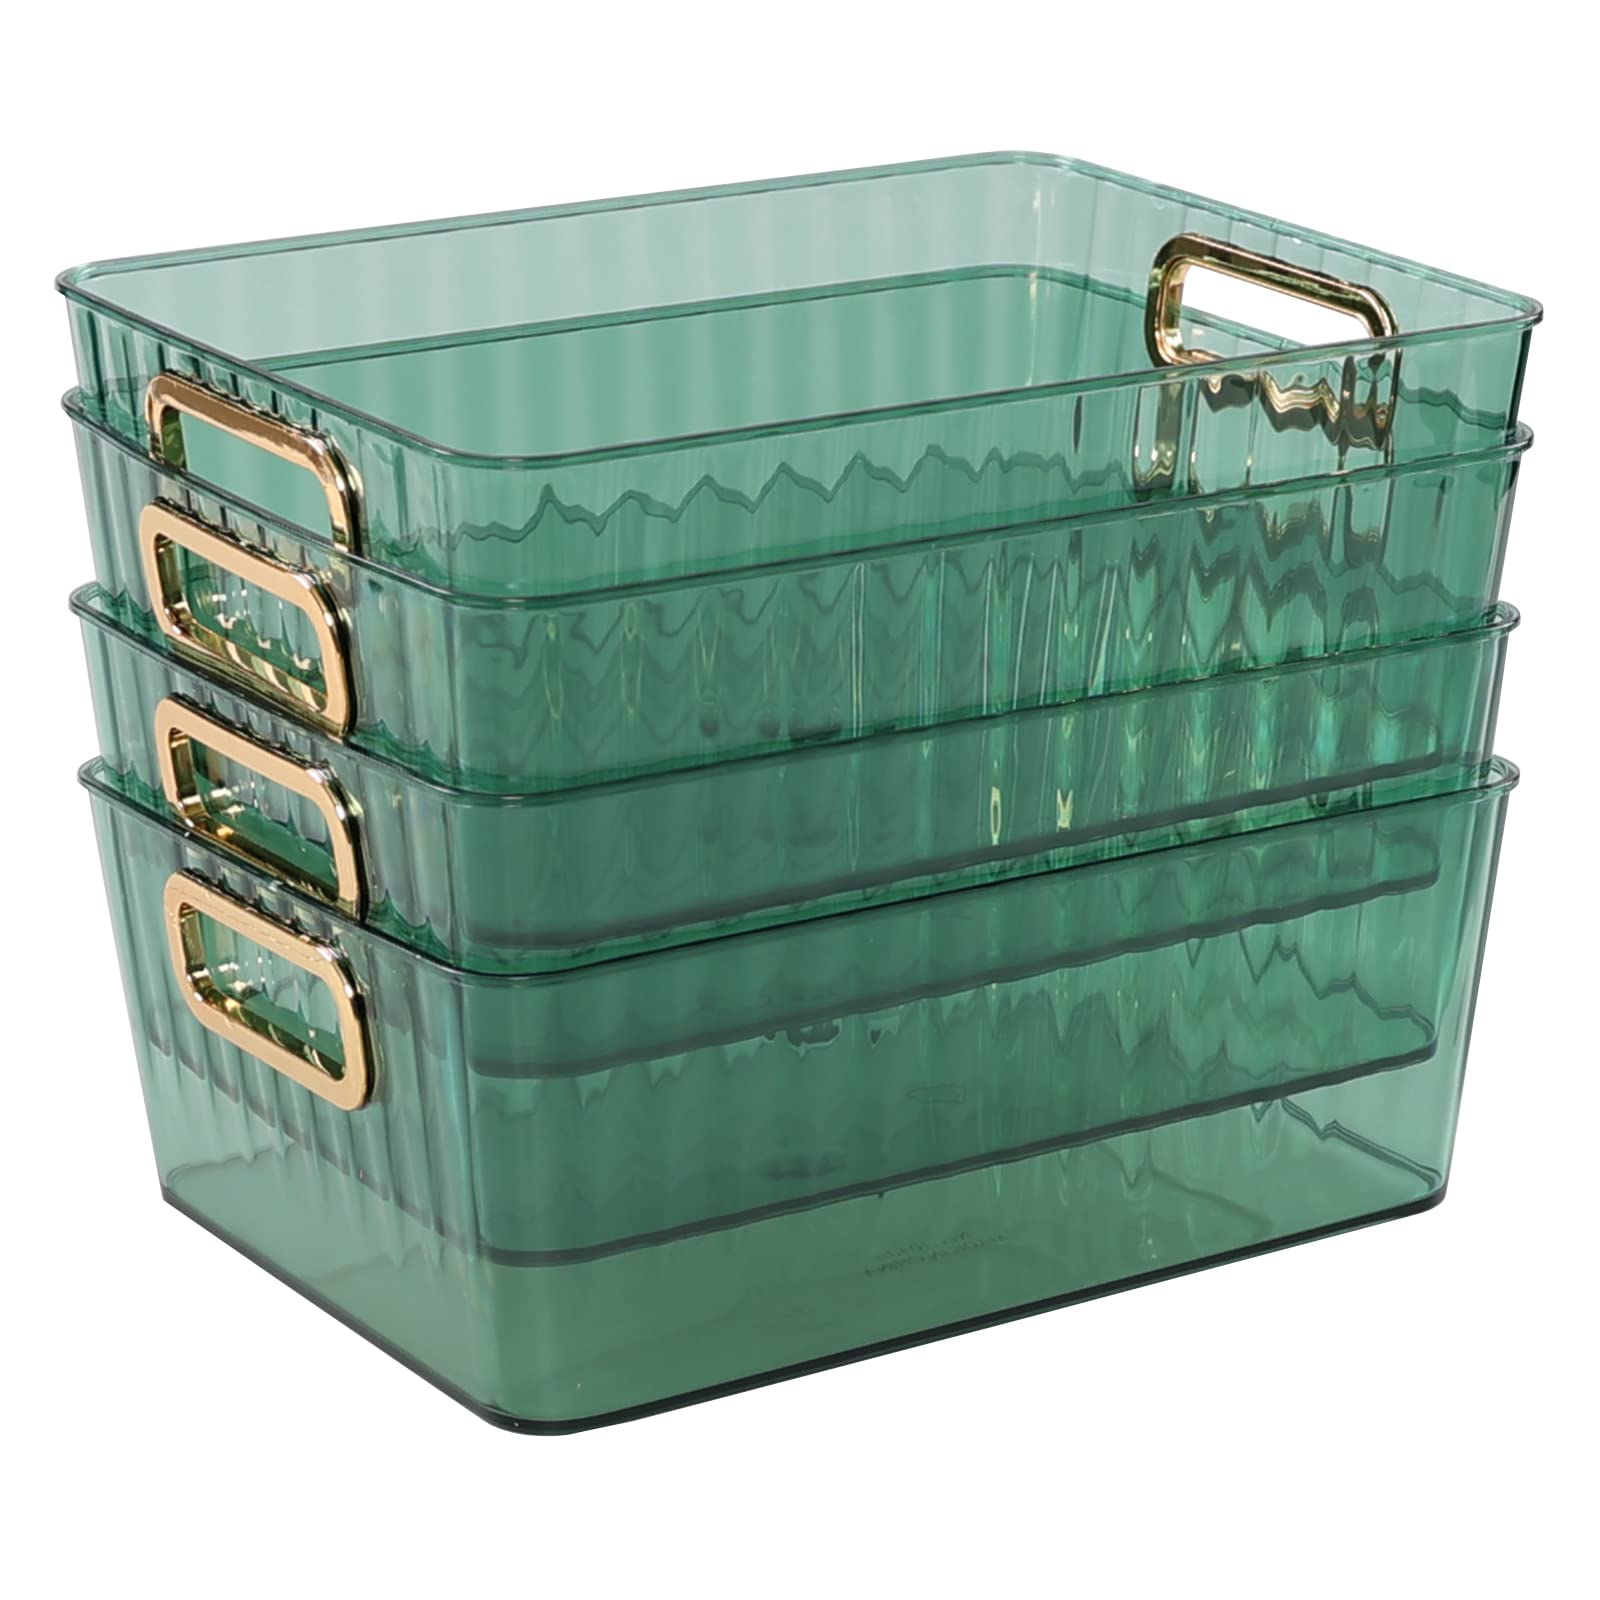 Vcansay Clear Plastic Pantry Organizer Bins, Small Plastic Storage Baskets, Green, 4-Pack